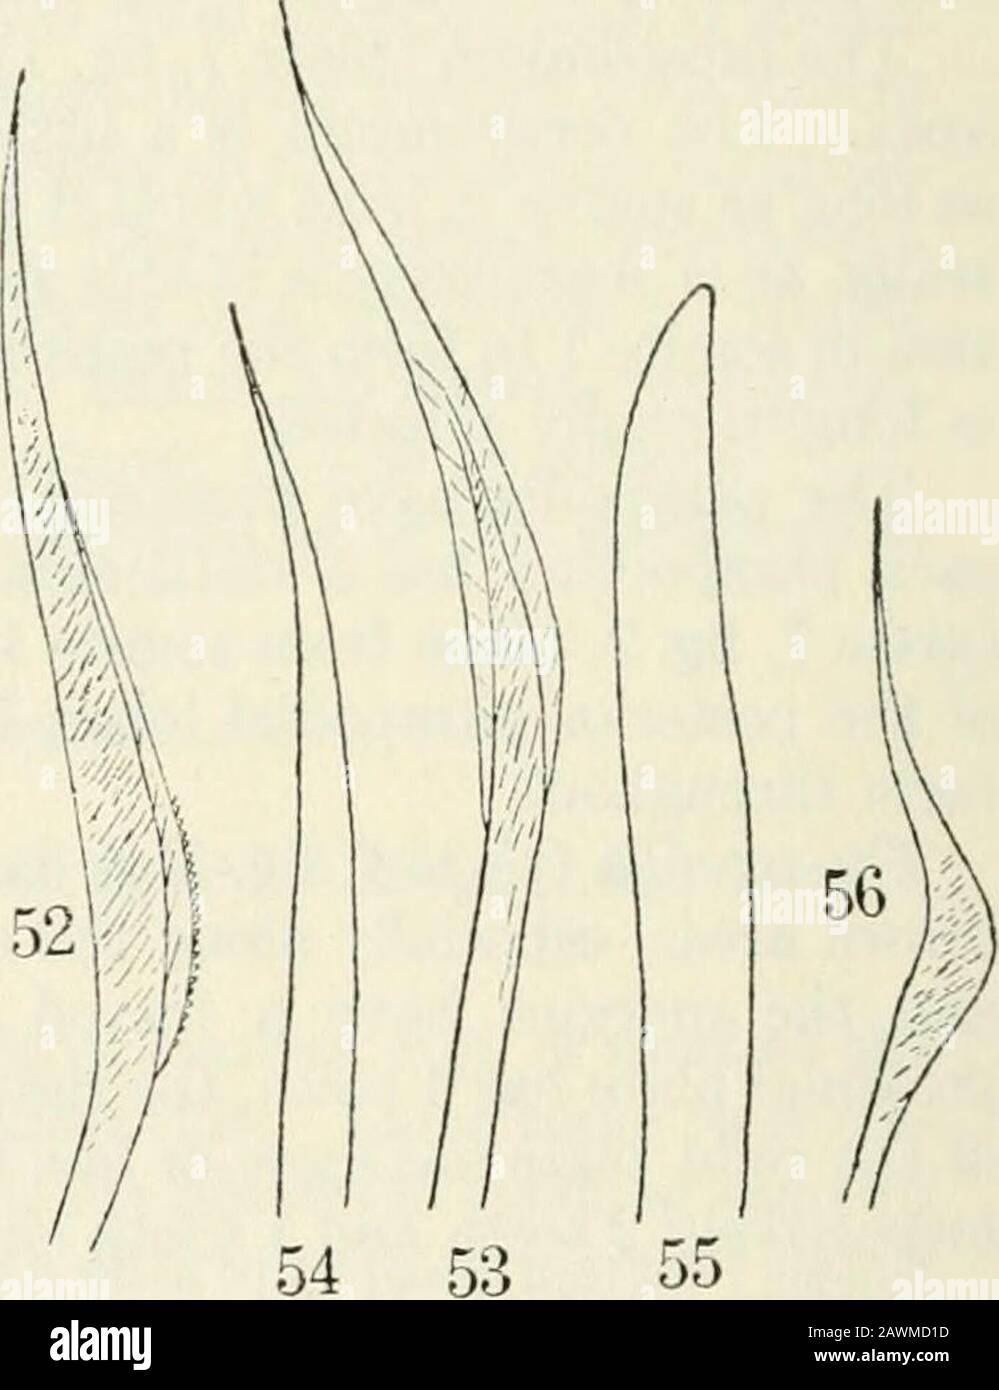 Papers . lewider than the prostomium, but about two-thirds as long. Its anterior margin is notice-ably recurved. The parapodia are well developed from thebeginning. They have the form usual in thisgenus, with a rounded setal lobe and a finger-shaped posterior one. There is a single, ratherprominent, yellow-colored acicula, roundedat the apex. The setse (text-fig. 52) arebroadened and bent toward the apex, thisbent region striated. Along the convexmargin is a narrow wing. A denticulationalong the margin of the wing is very markedin some and barely discernible in others,very small. There are two Stock Photo